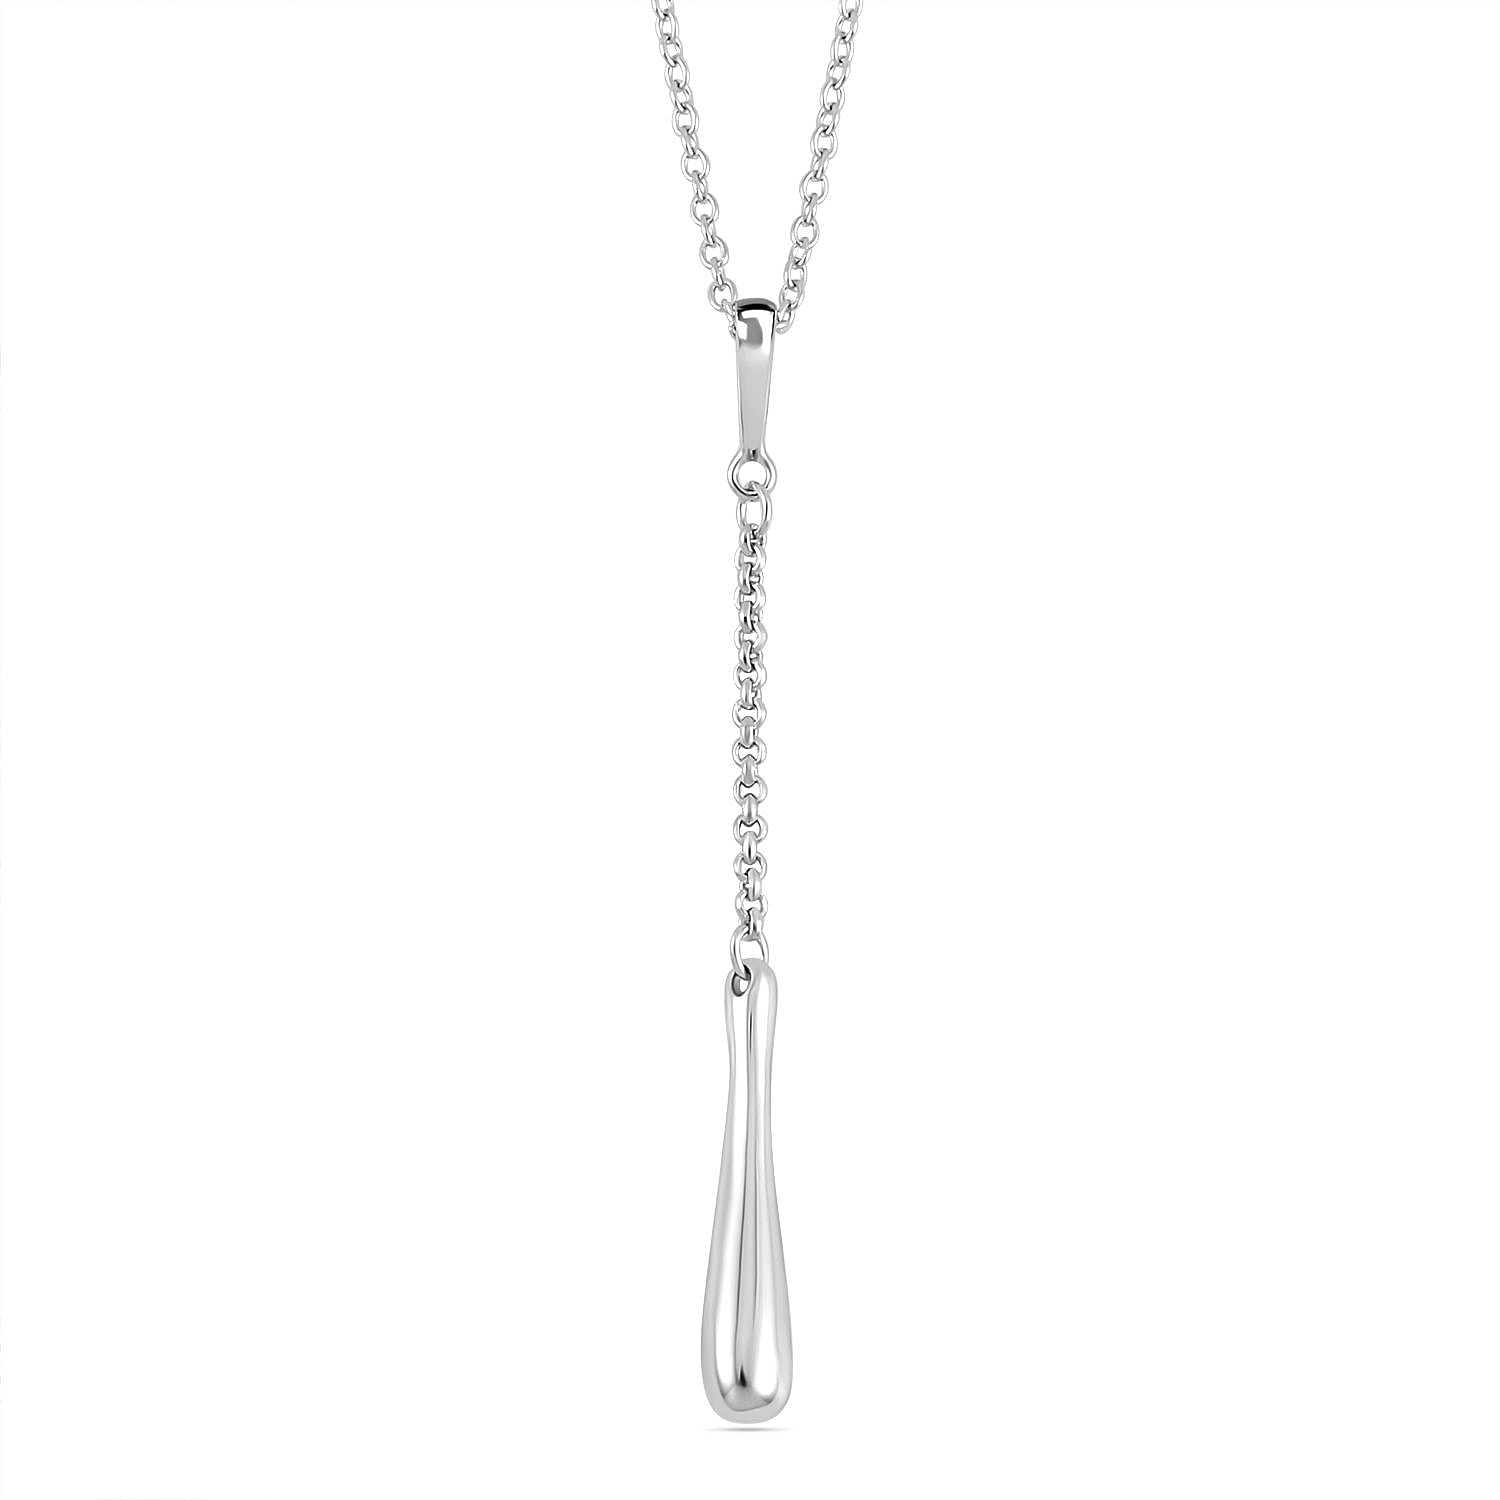 Lucy Q Drip Collection - Pendant with Chain (Size 20) in Rhodium Overlay Sterling Silver